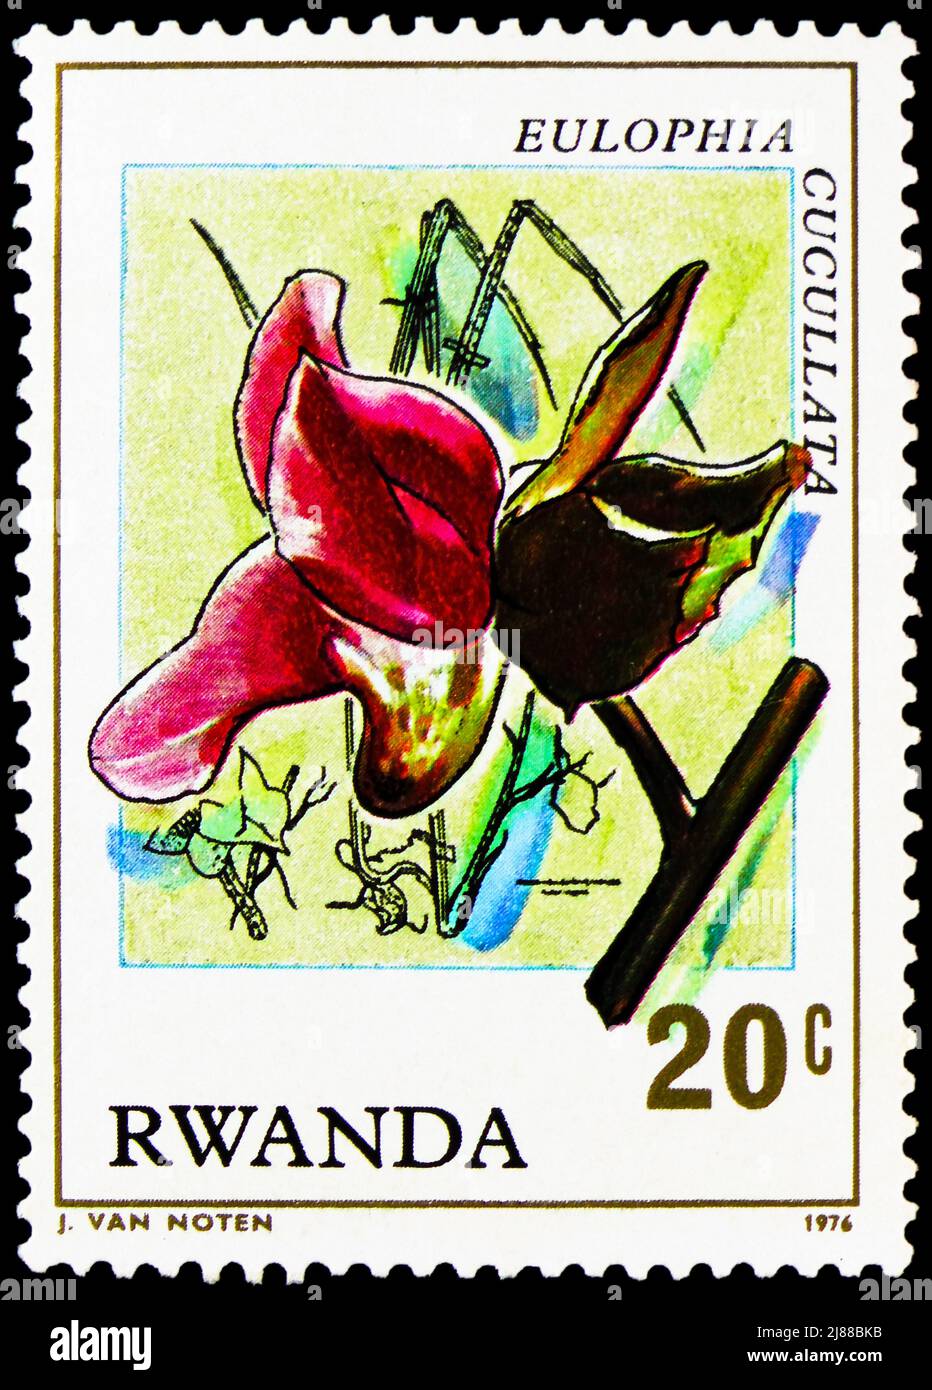 MOSCOW, RUSSIA - APRIL 10, 2022: Postage stamp printed in Rwanda shows Eulophia cucullata, Orchids serie, circa 1976 Stock Photo